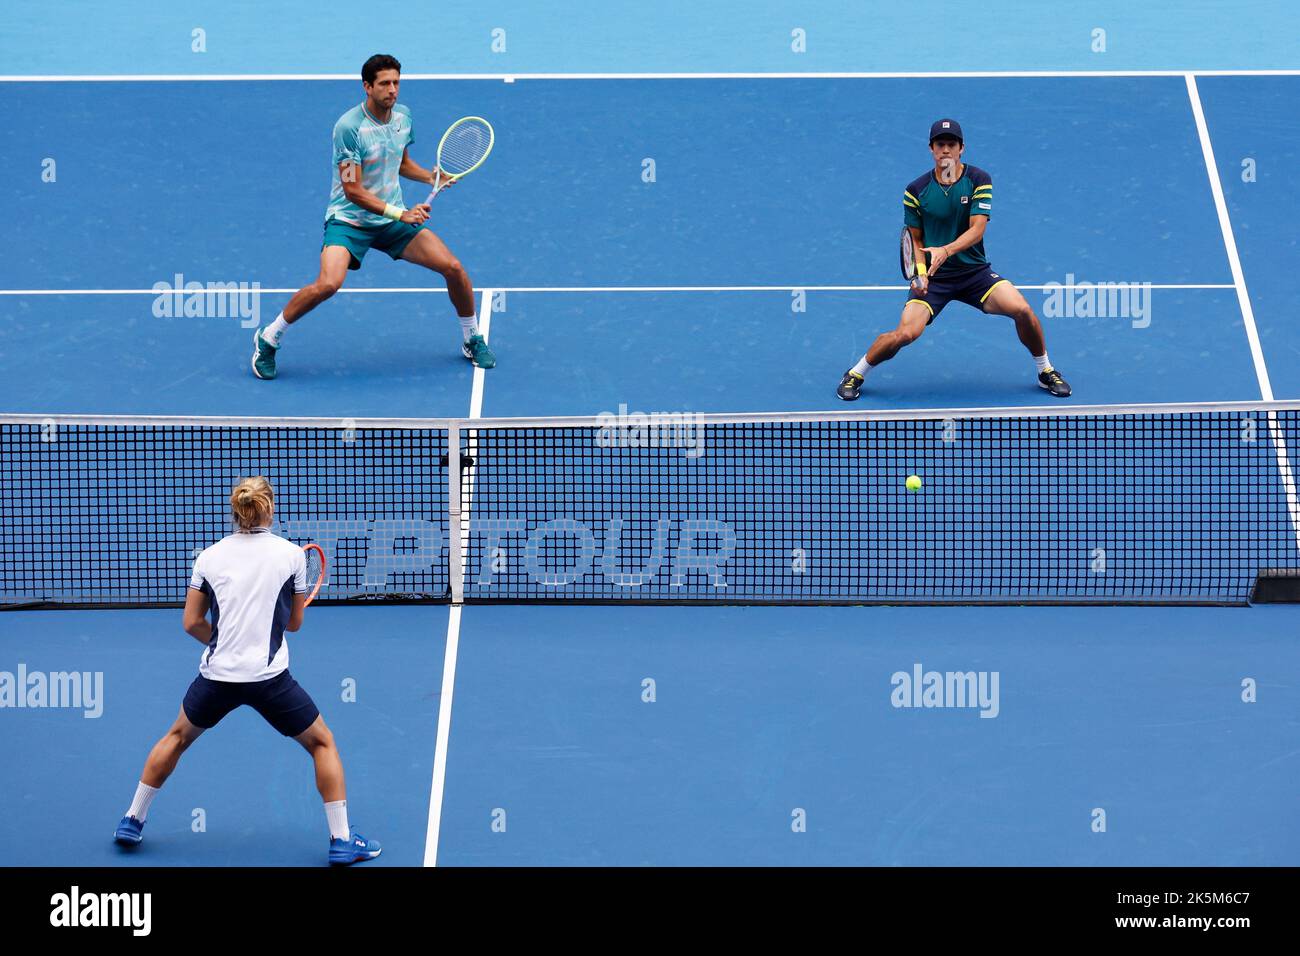 Tokyo, Japan. 9th Oct, 2022. (Up L to R) Marcelo MELO (BRA) and Mackenzie MCDONALD (USA) in action against Rafael MATOS (BRA) during their Doubles Final match at the Rakuten Japan Open Tennis Championships 2022 at Ariake Coliseum. The tournament is held from October 1 to 9. M. McDonald and M. Melo won 6:4, 3:6, 10:4. (Credit Image: © Rodrigo Reyes Marin/ZUMA Press Wire) Credit: ZUMA Press, Inc./Alamy Live News Stock Photo